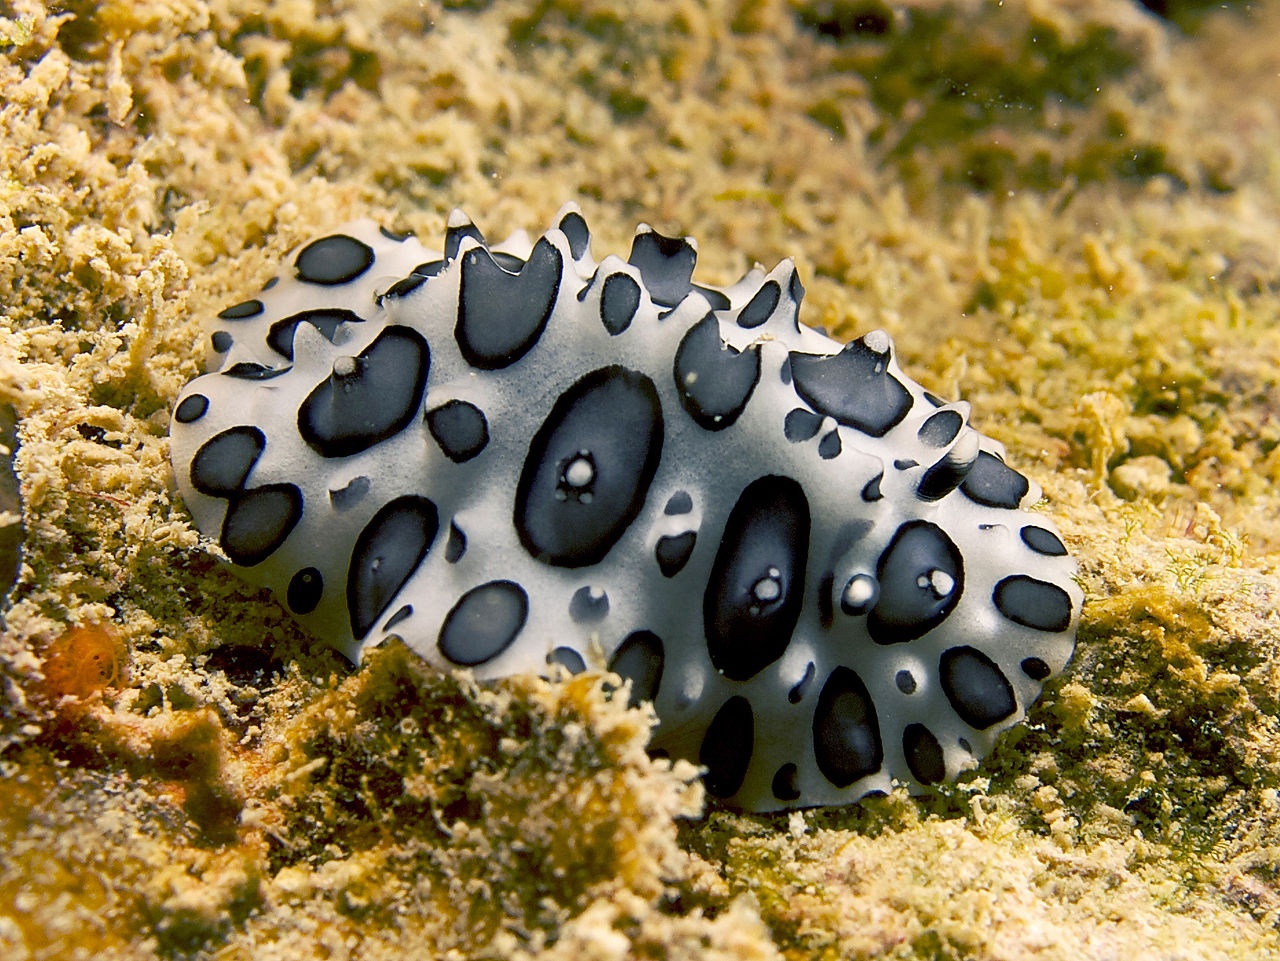 Phyllidie dalmatienne - Ceratophyllidia papilligera - <a href='https://commons.wikimedia.org/wiki/File:Phyllidiopsis_papilligera_(Black-spotted_Nudibranch_-_North_Haiti).jpg' title='via Wikimedia Commons'>Nhobgood Nick Hobgood</a> / <a href='https://creativecommons.org/licenses/by-sa/3.0'>CC BY-SA</a> - BioObs